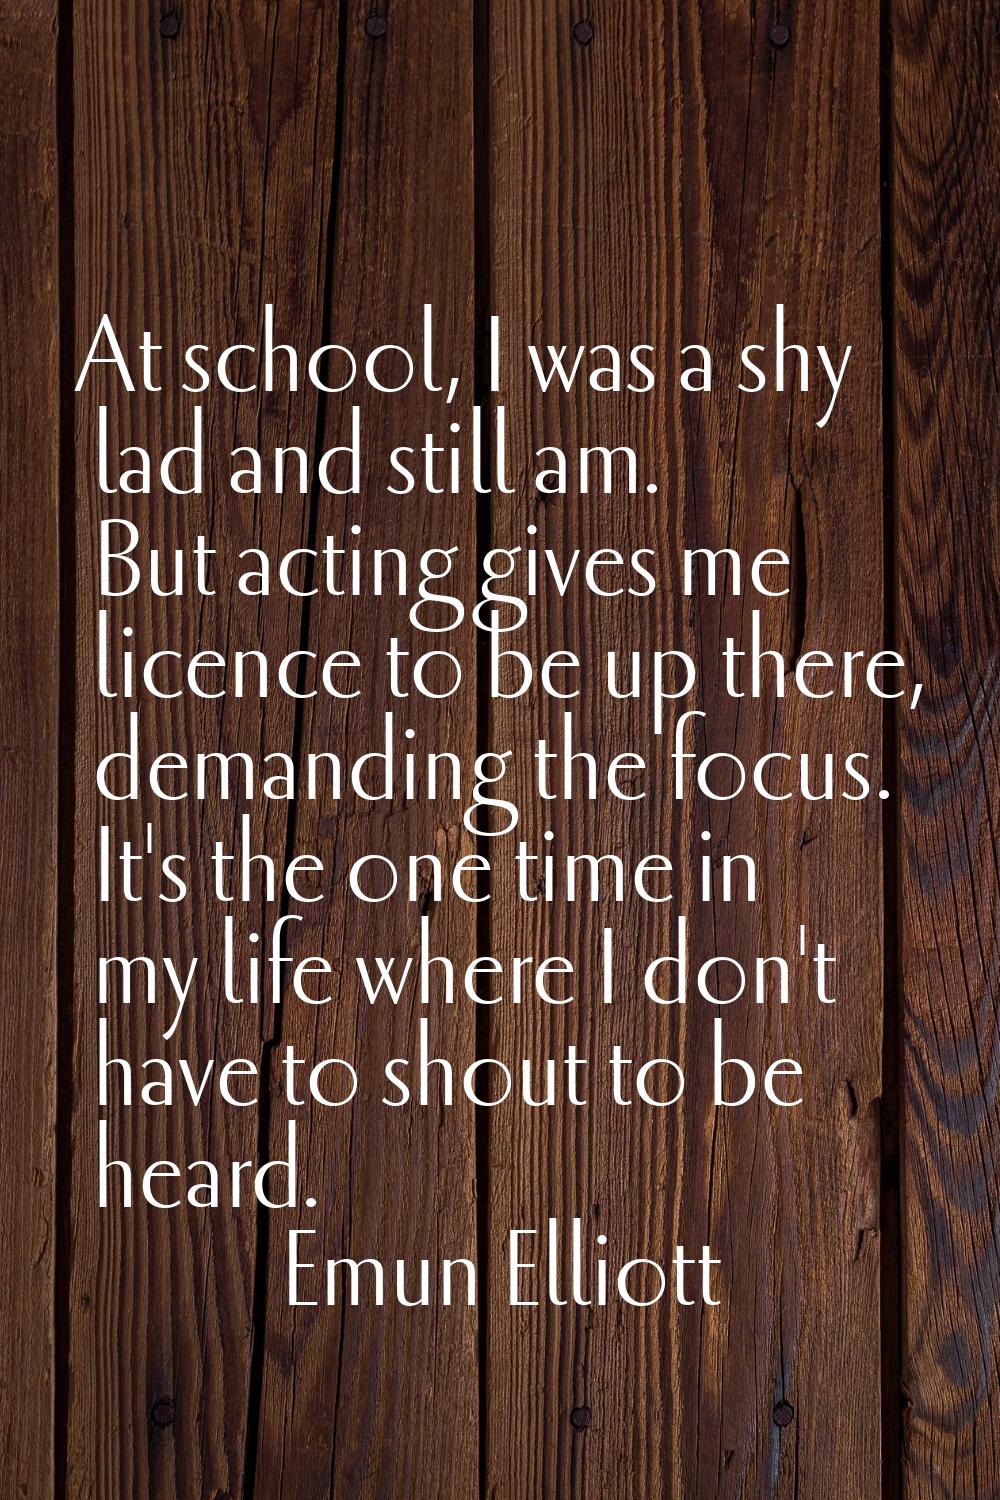 At school, I was a shy lad and still am. But acting gives me licence to be up there, demanding the 